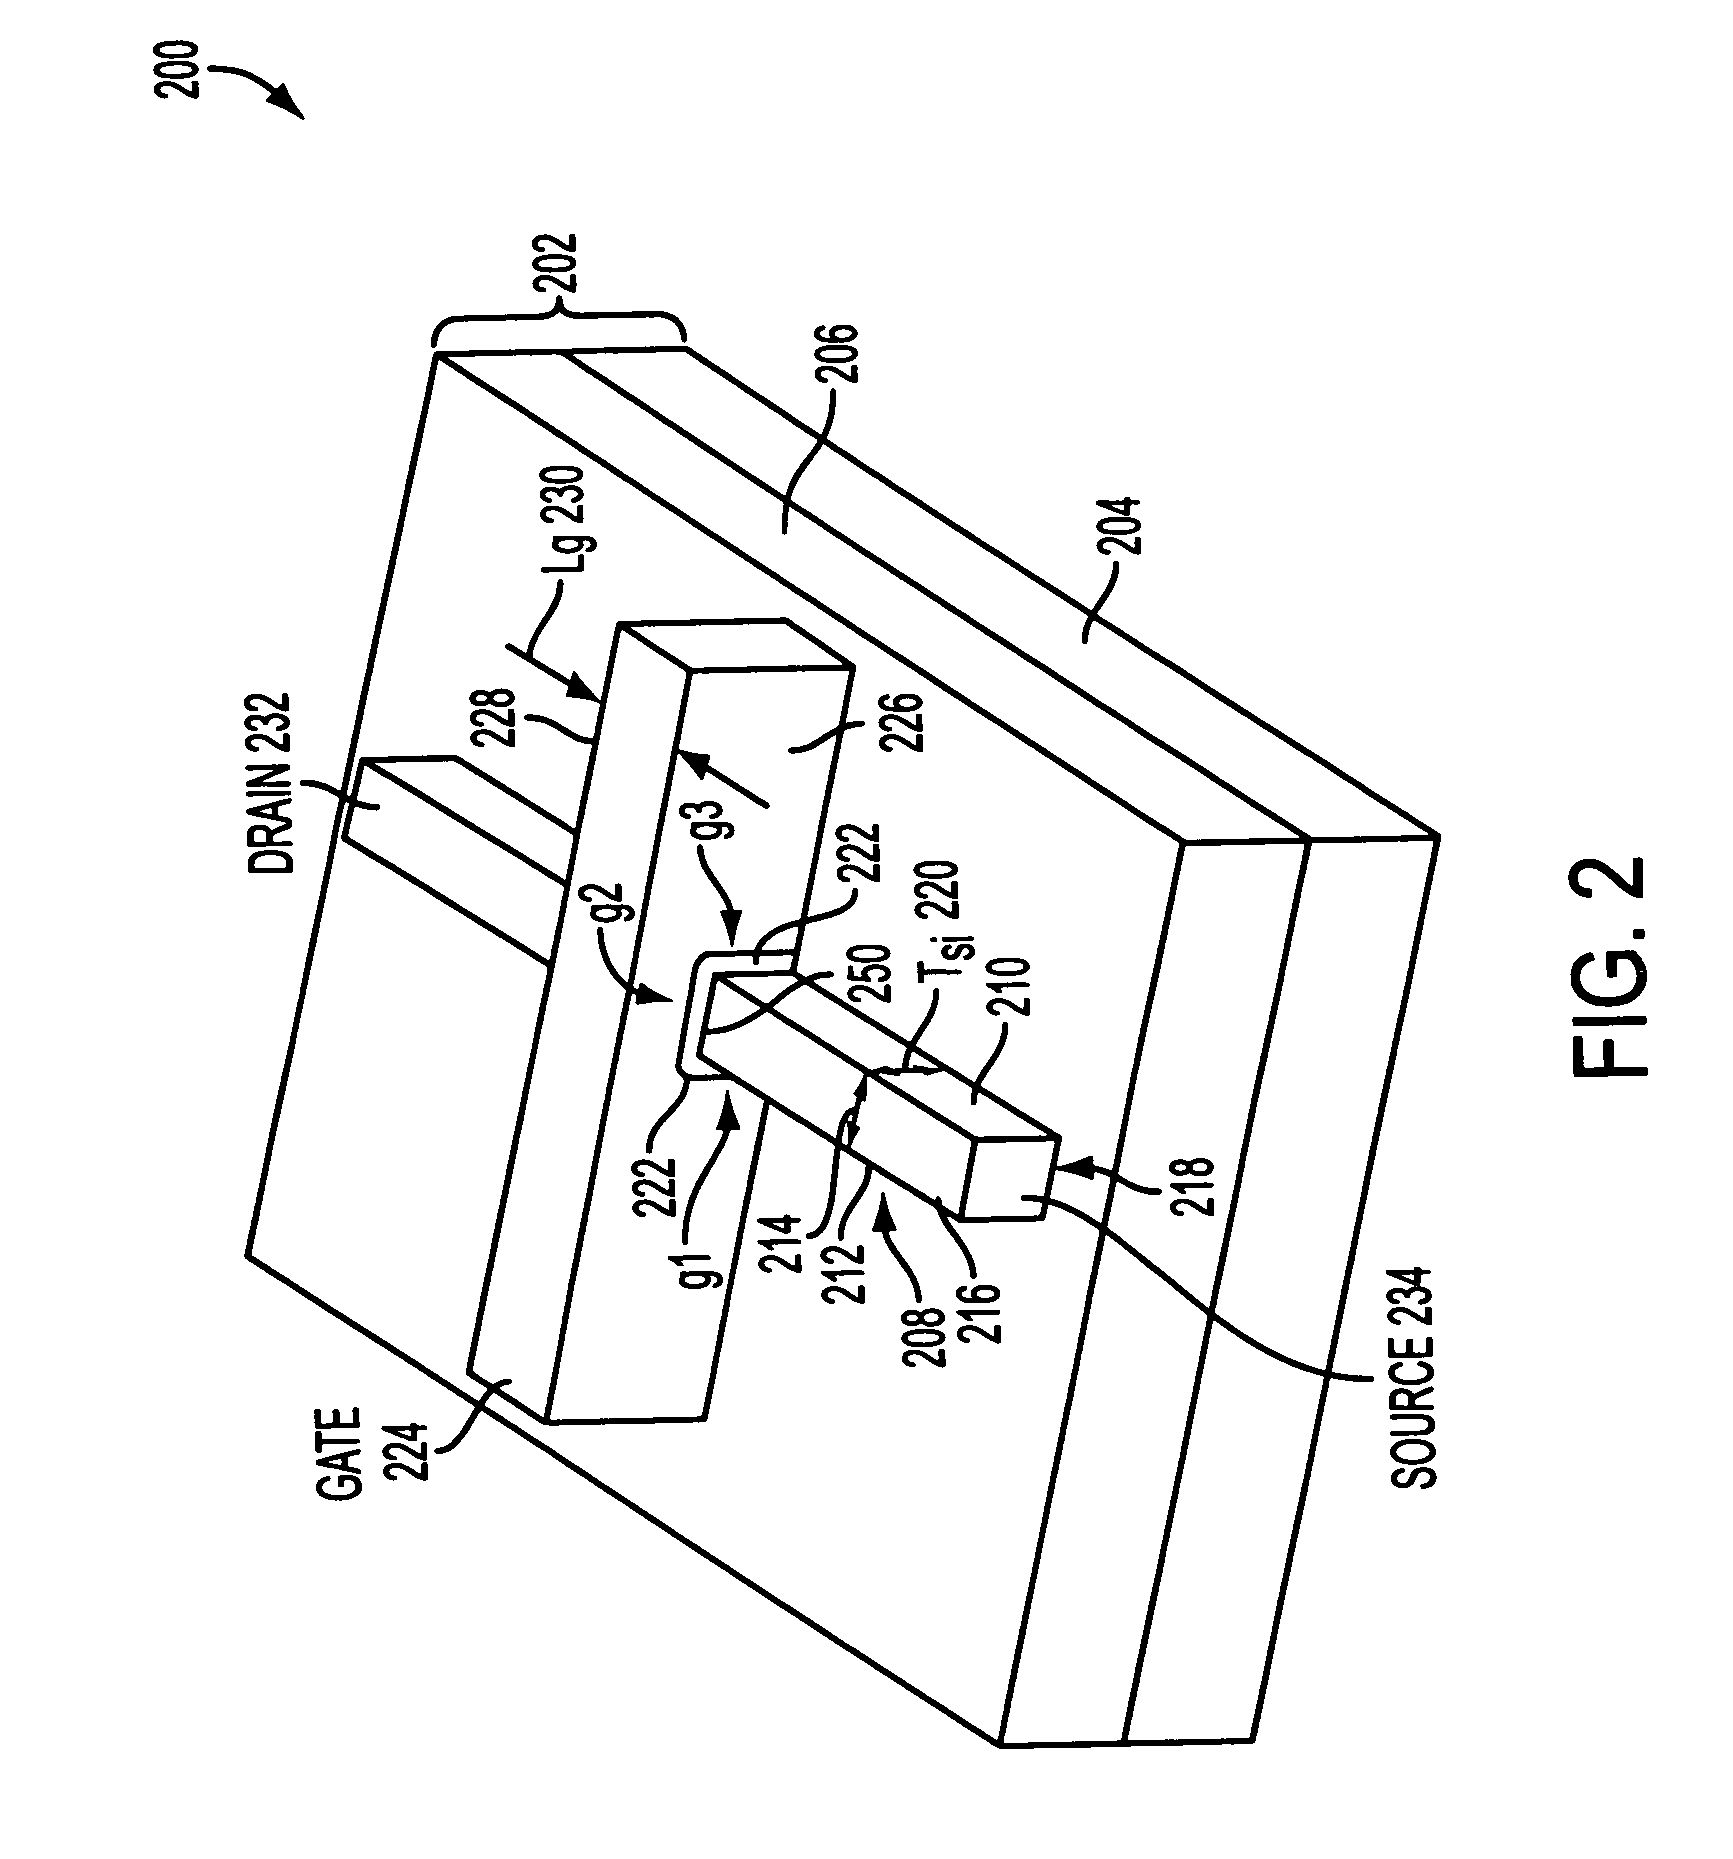 Floating-body dynamic random access memory and method of fabrication in tri-gate technology